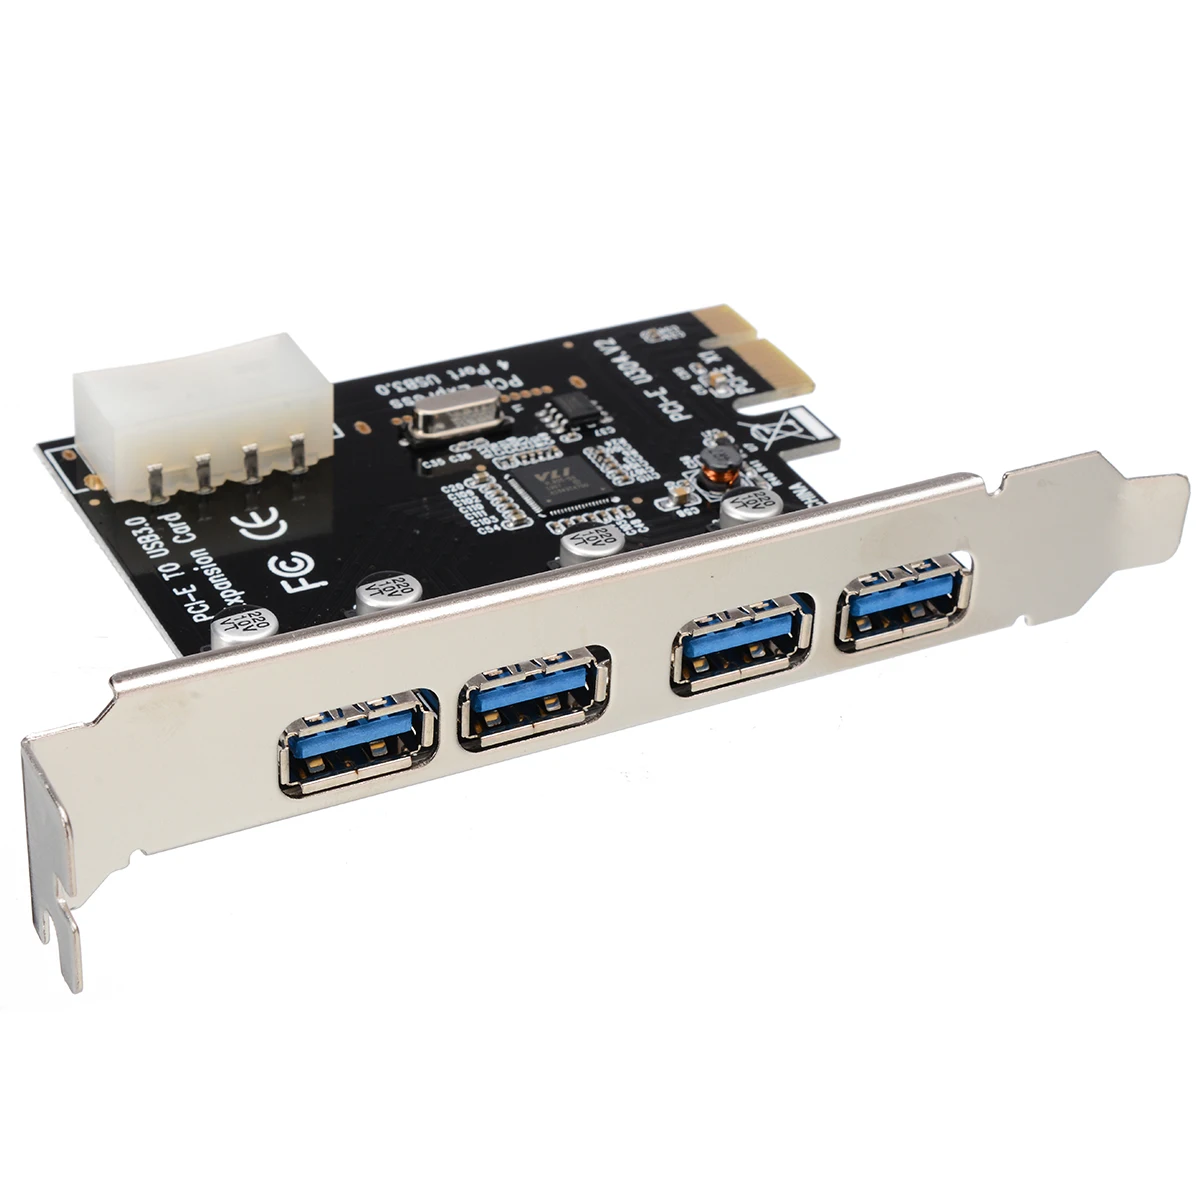 Pohiks Desktop Extend Chipset 4 Port PCI-E to USB 3.0 HUB PCI Express Expansion Card Adapter A Female Connectors 5 Gbps Speed